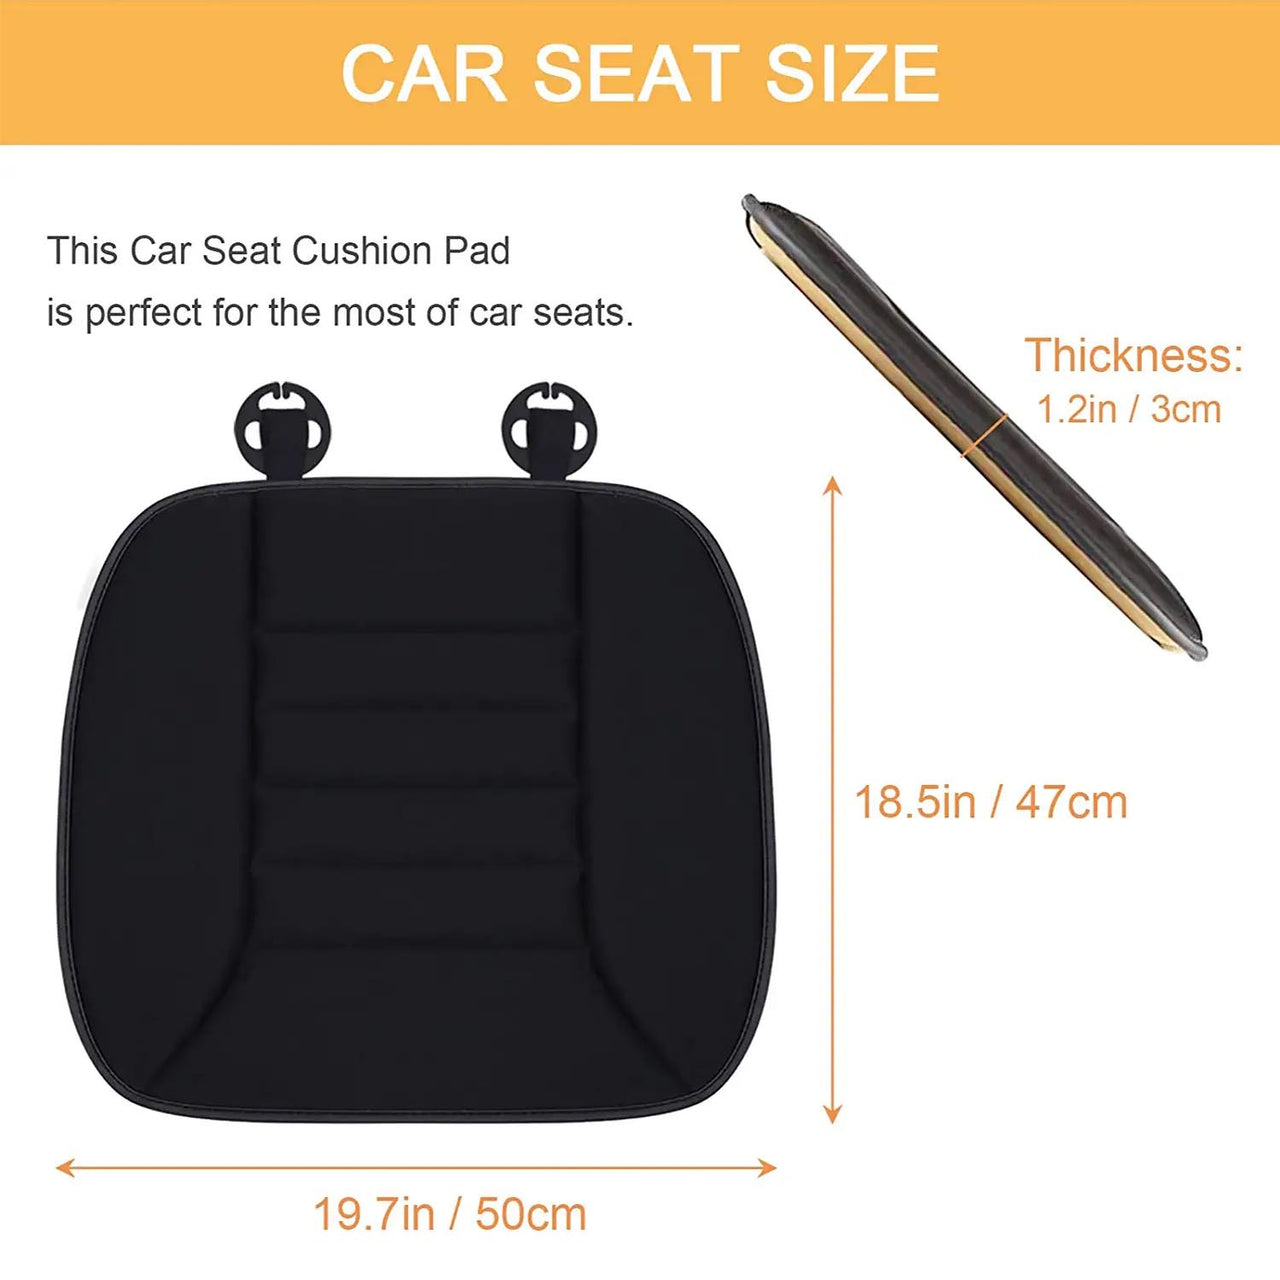 Car Seat Cushion with 1.2inch Comfort Memory Foam, Custom Fit For Your Cars, Seat Cushion for Car and Office Chair SU19989